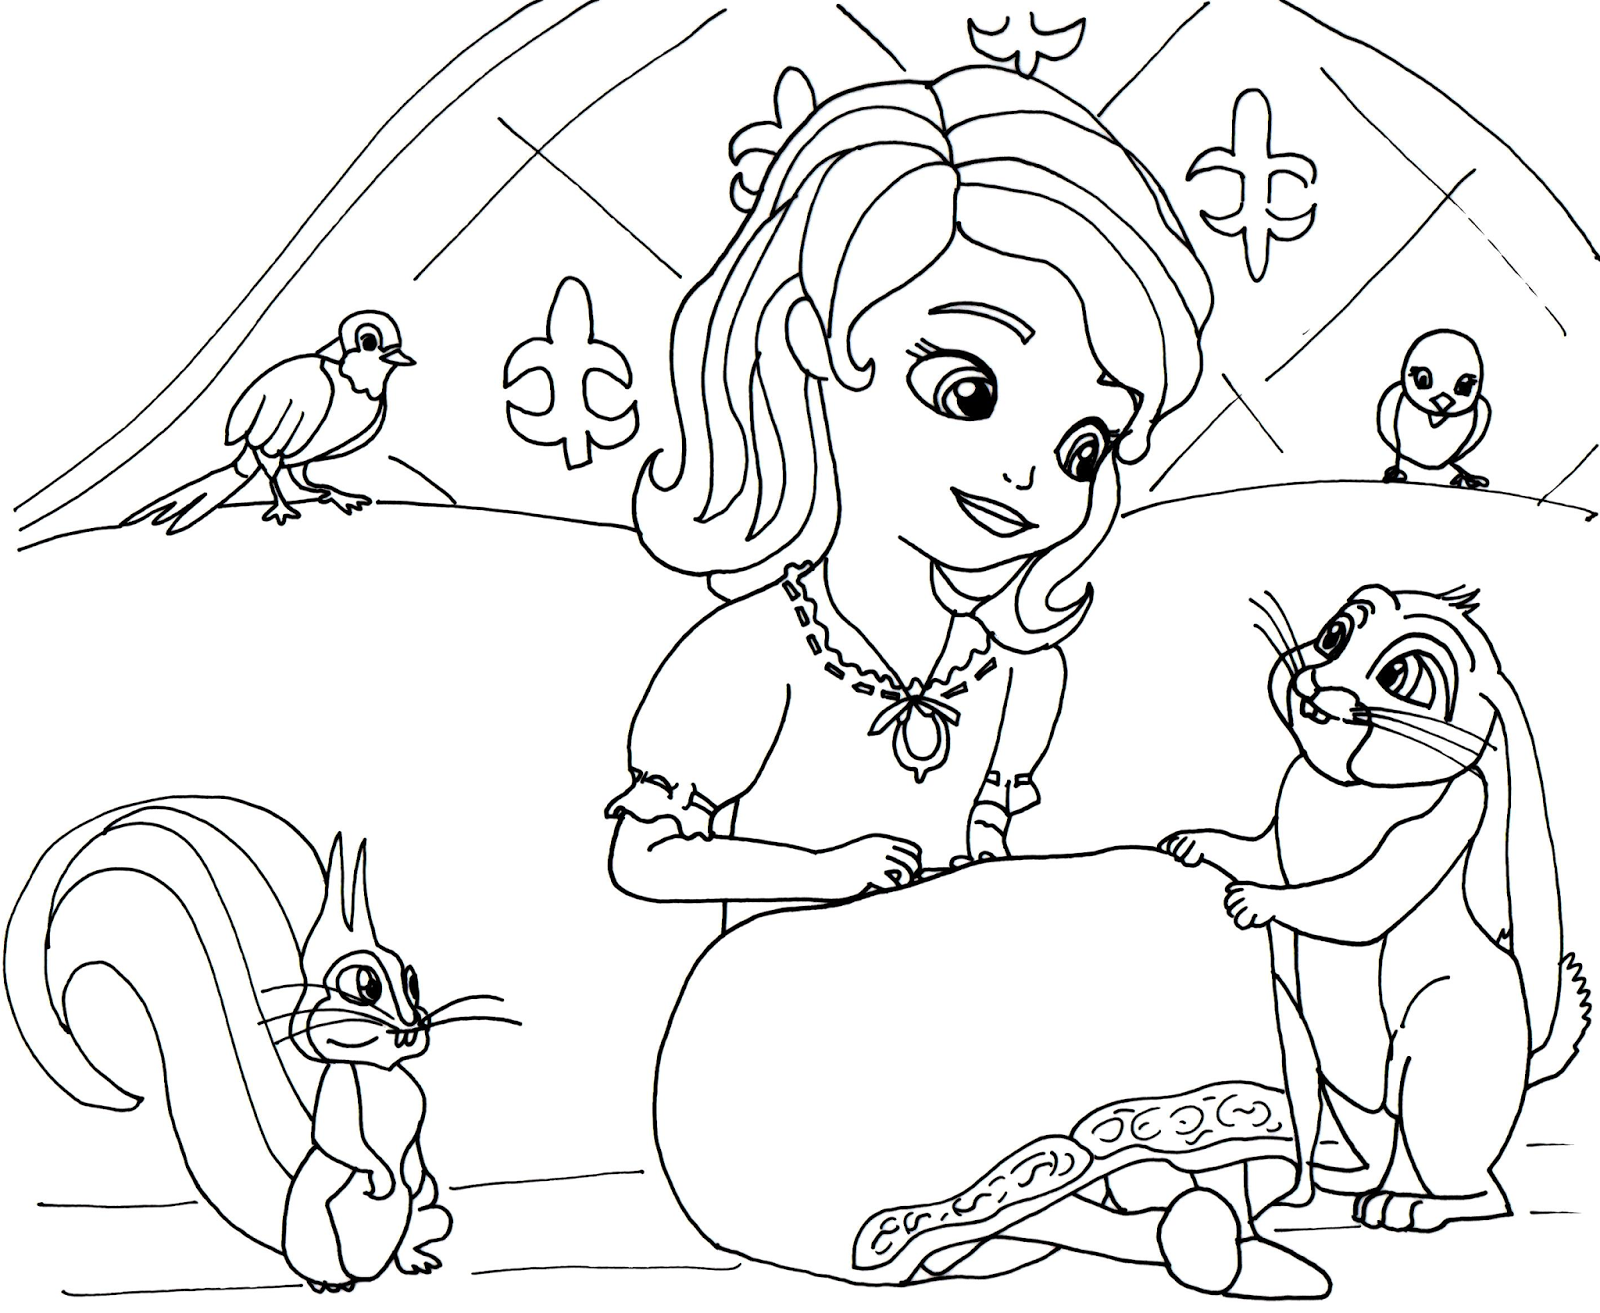 Sofia The First Coloring Pages: Sofia the First Coloring Page with